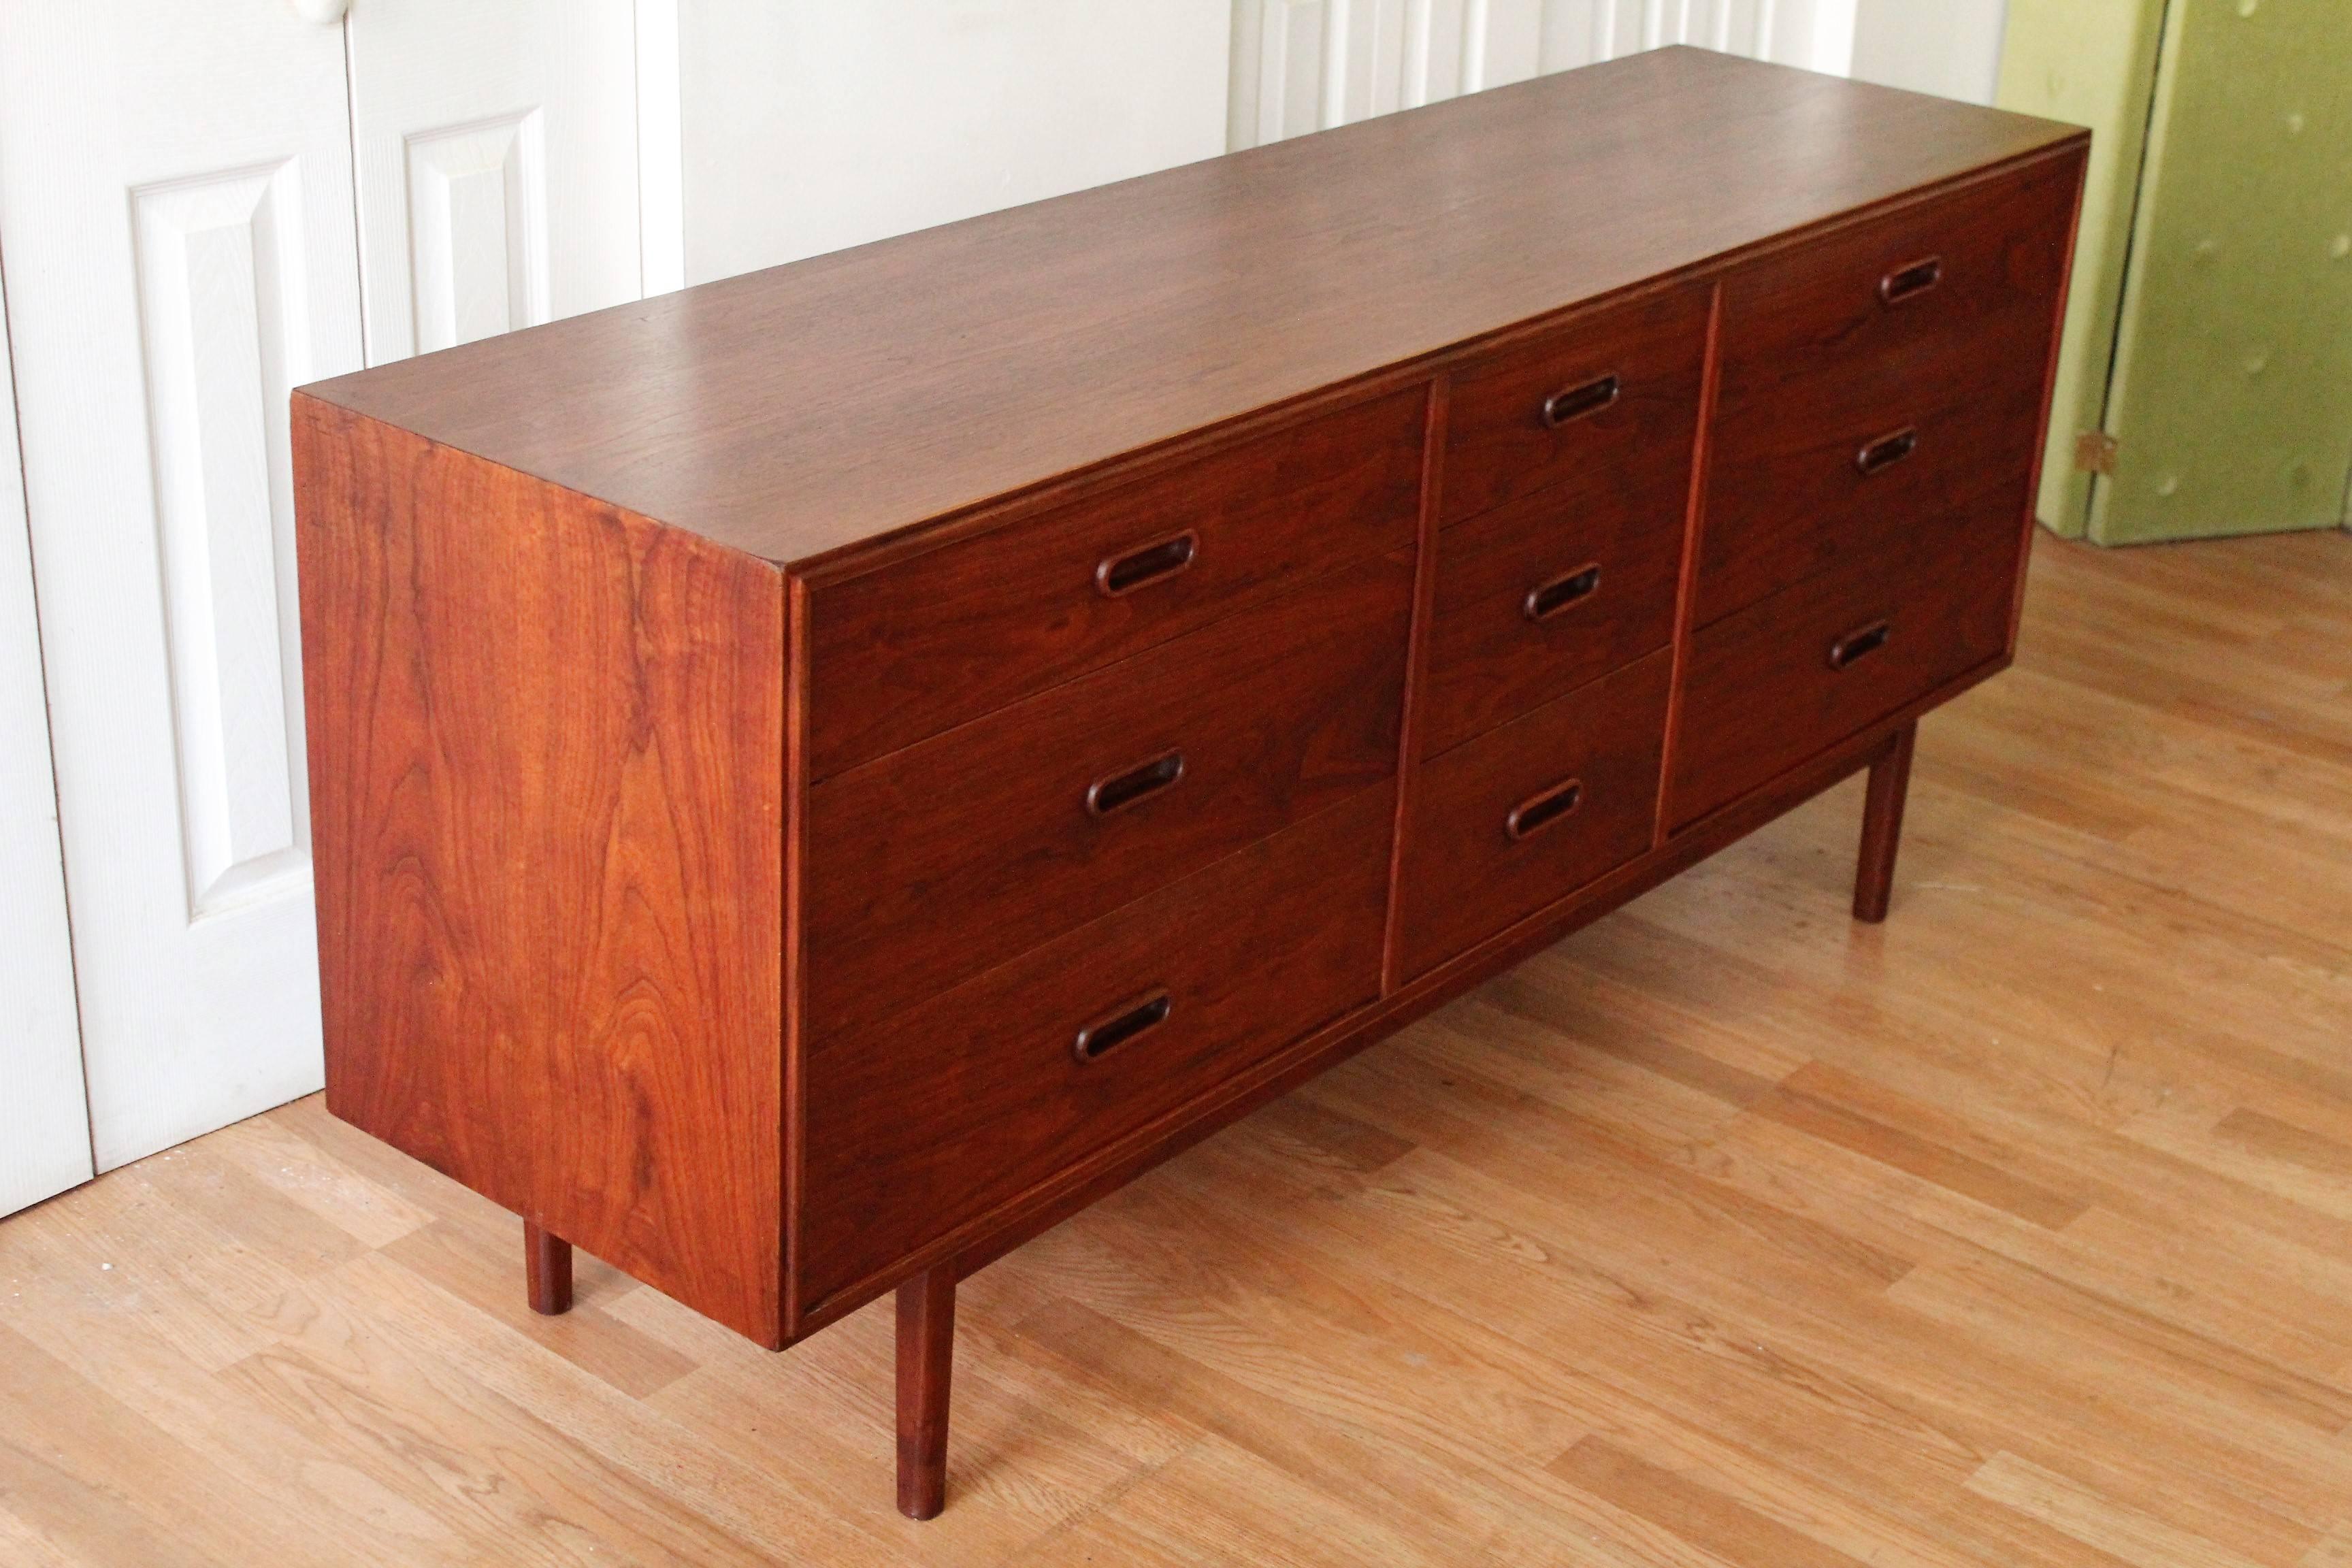 Walnut low boy dresser by Founders. Designed by Jack Cartwright, this fantastic walnut patina dresser, has nine drawers and a beautiful original finish.
Use in front hall as a landing strip for your keys, mail, etc. or in the bedroom as a dresser.